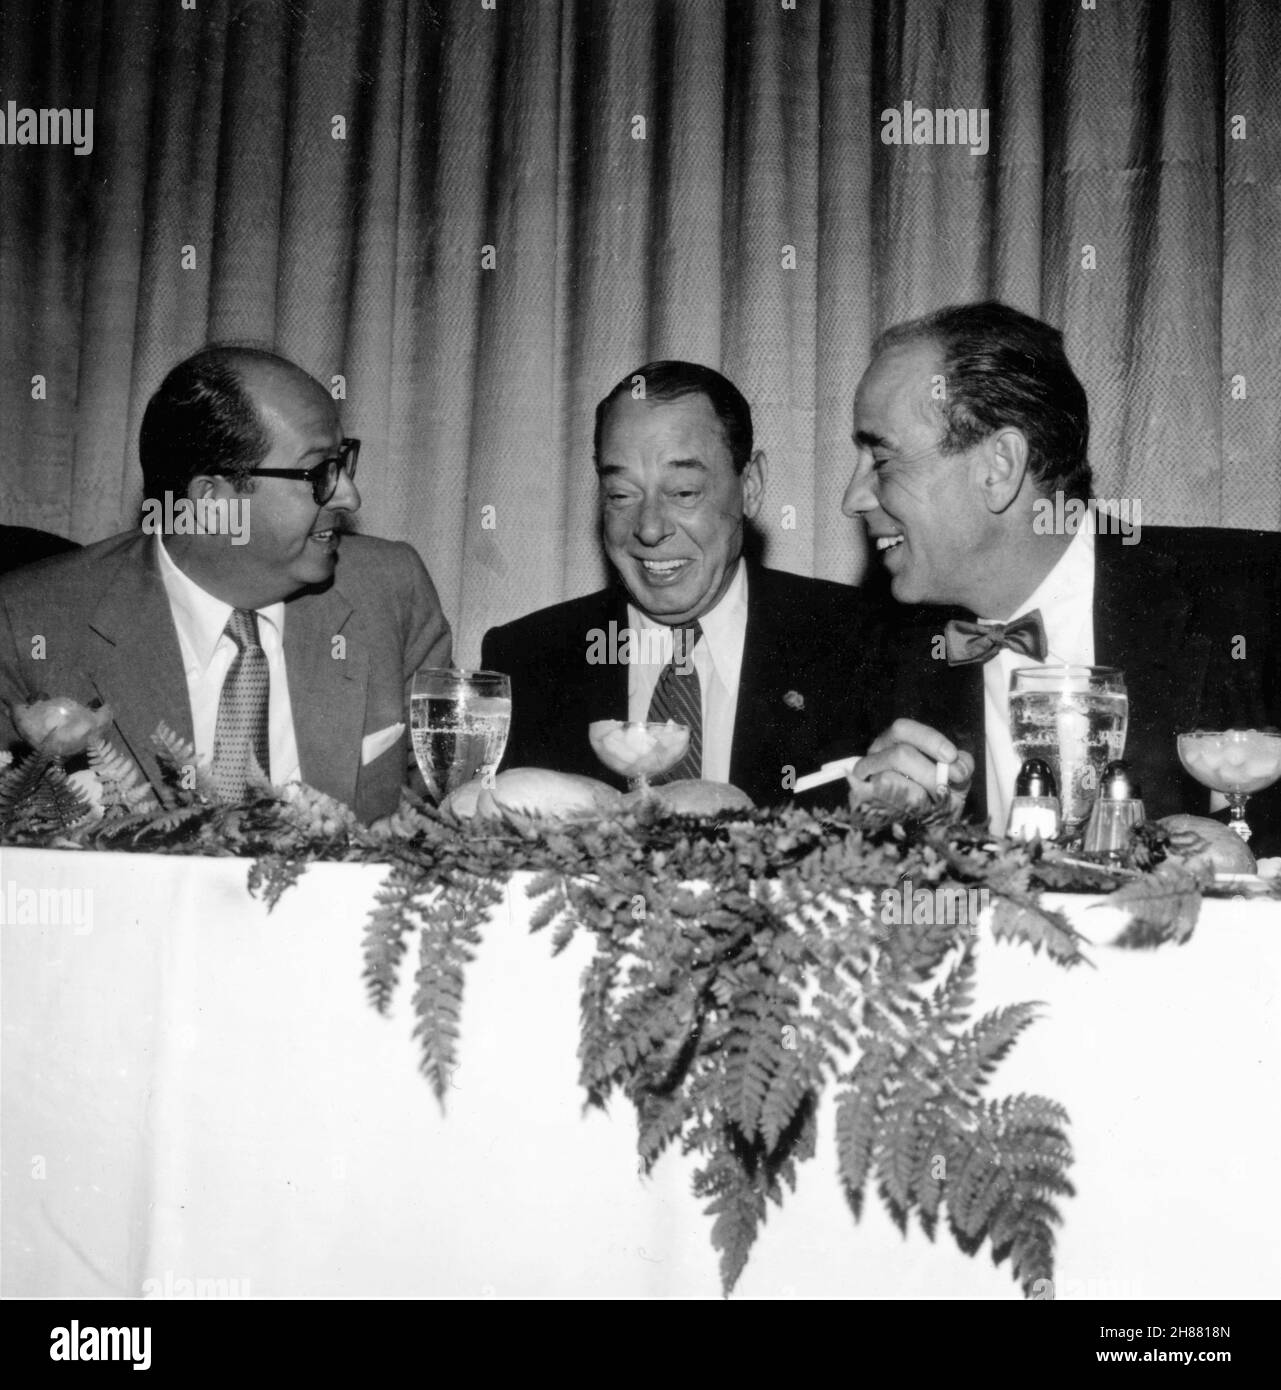 HUMPHREY BOGART candid photo with comedians PHIL SILVERS and JOE E. LEWIS during his afternoon NEW YORK FRIARS CLUB ROAST in September 1955 Stock Photo